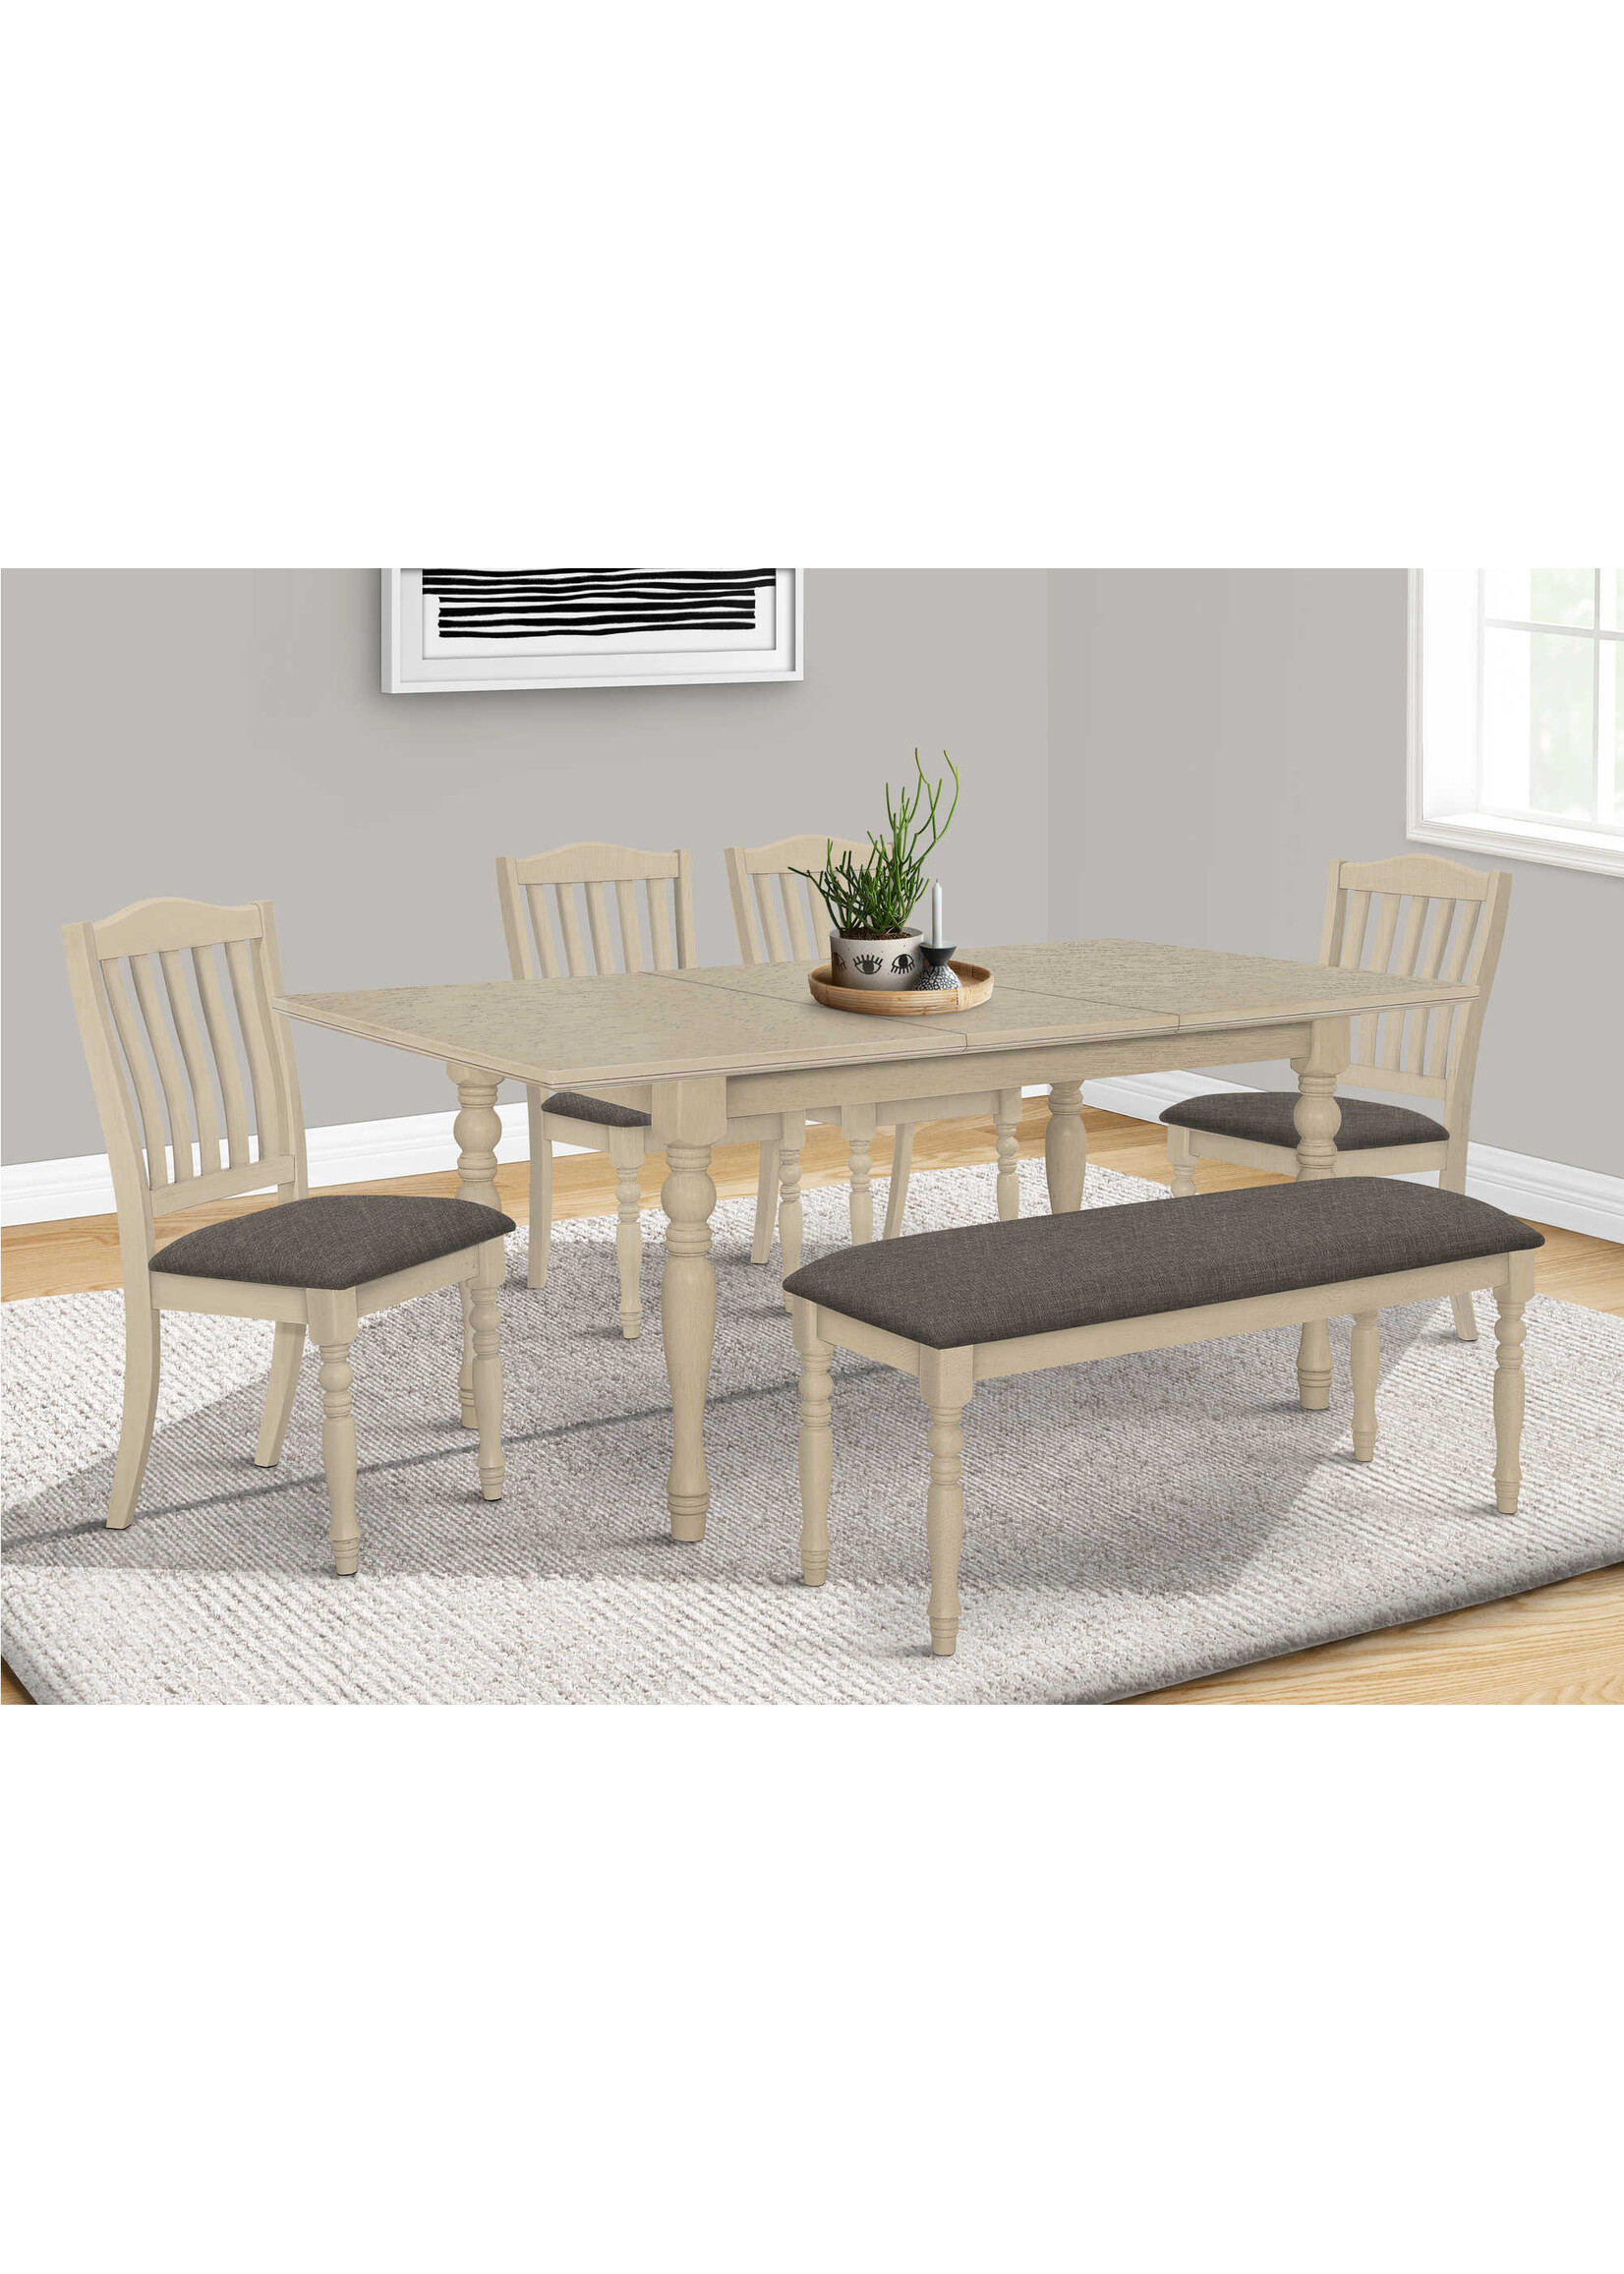 TABLE A MANGER I1391 - 42"X 78" / EXTENSION 18" GRIS